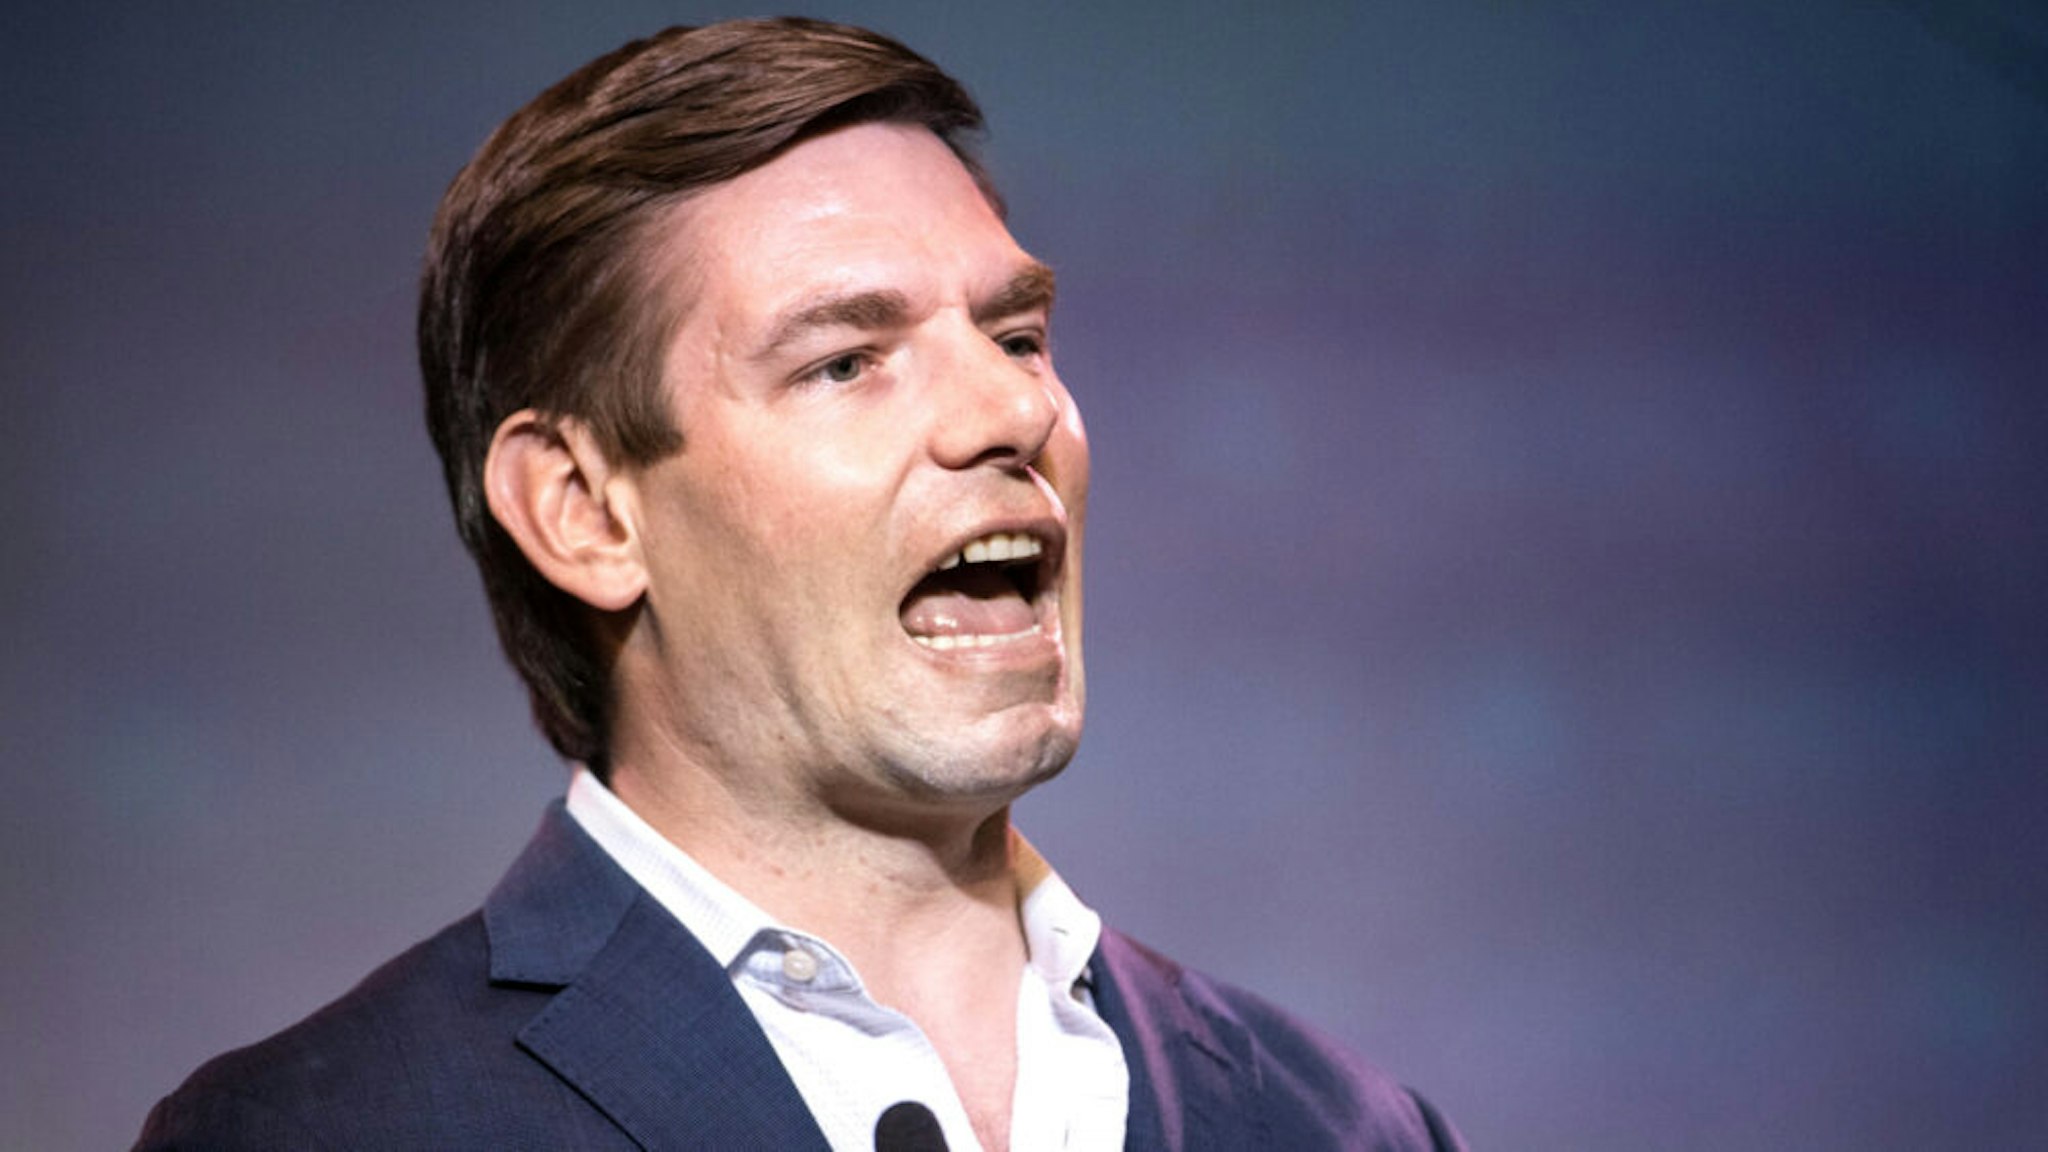 COLUMBIA, SC - JUNE 22: Democratic presidential candidate Rep. Eric Swalwell (D-CA) speaks to the crowd during the 2019 South Carolina Democratic Party State Convention on June 22, 2019 in Columbia, South Carolina. Democratic presidential hopefuls are converging on South Carolina this weekend for a host of events where the candidates can directly address an important voting bloc in the Democratic primary.